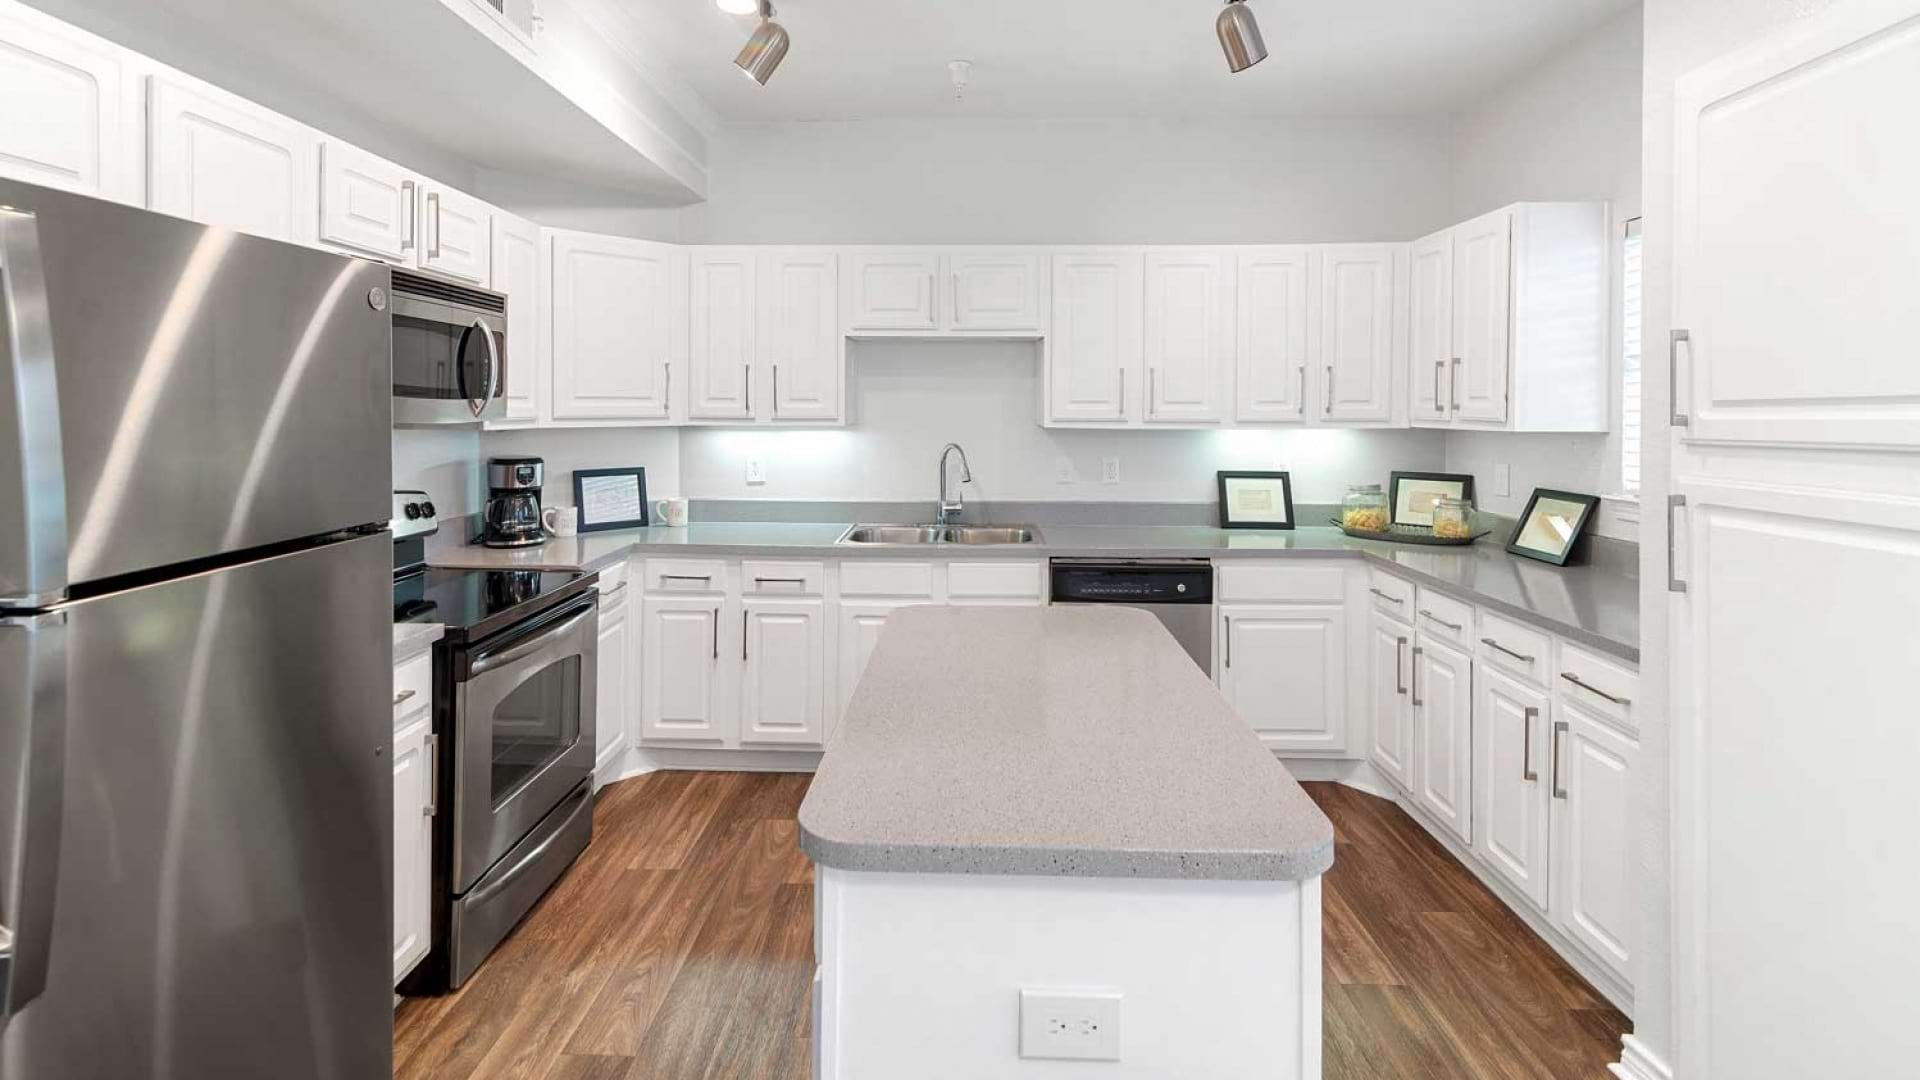 Spacious Kitchen with an Island at Our Apartments on Cooper St.